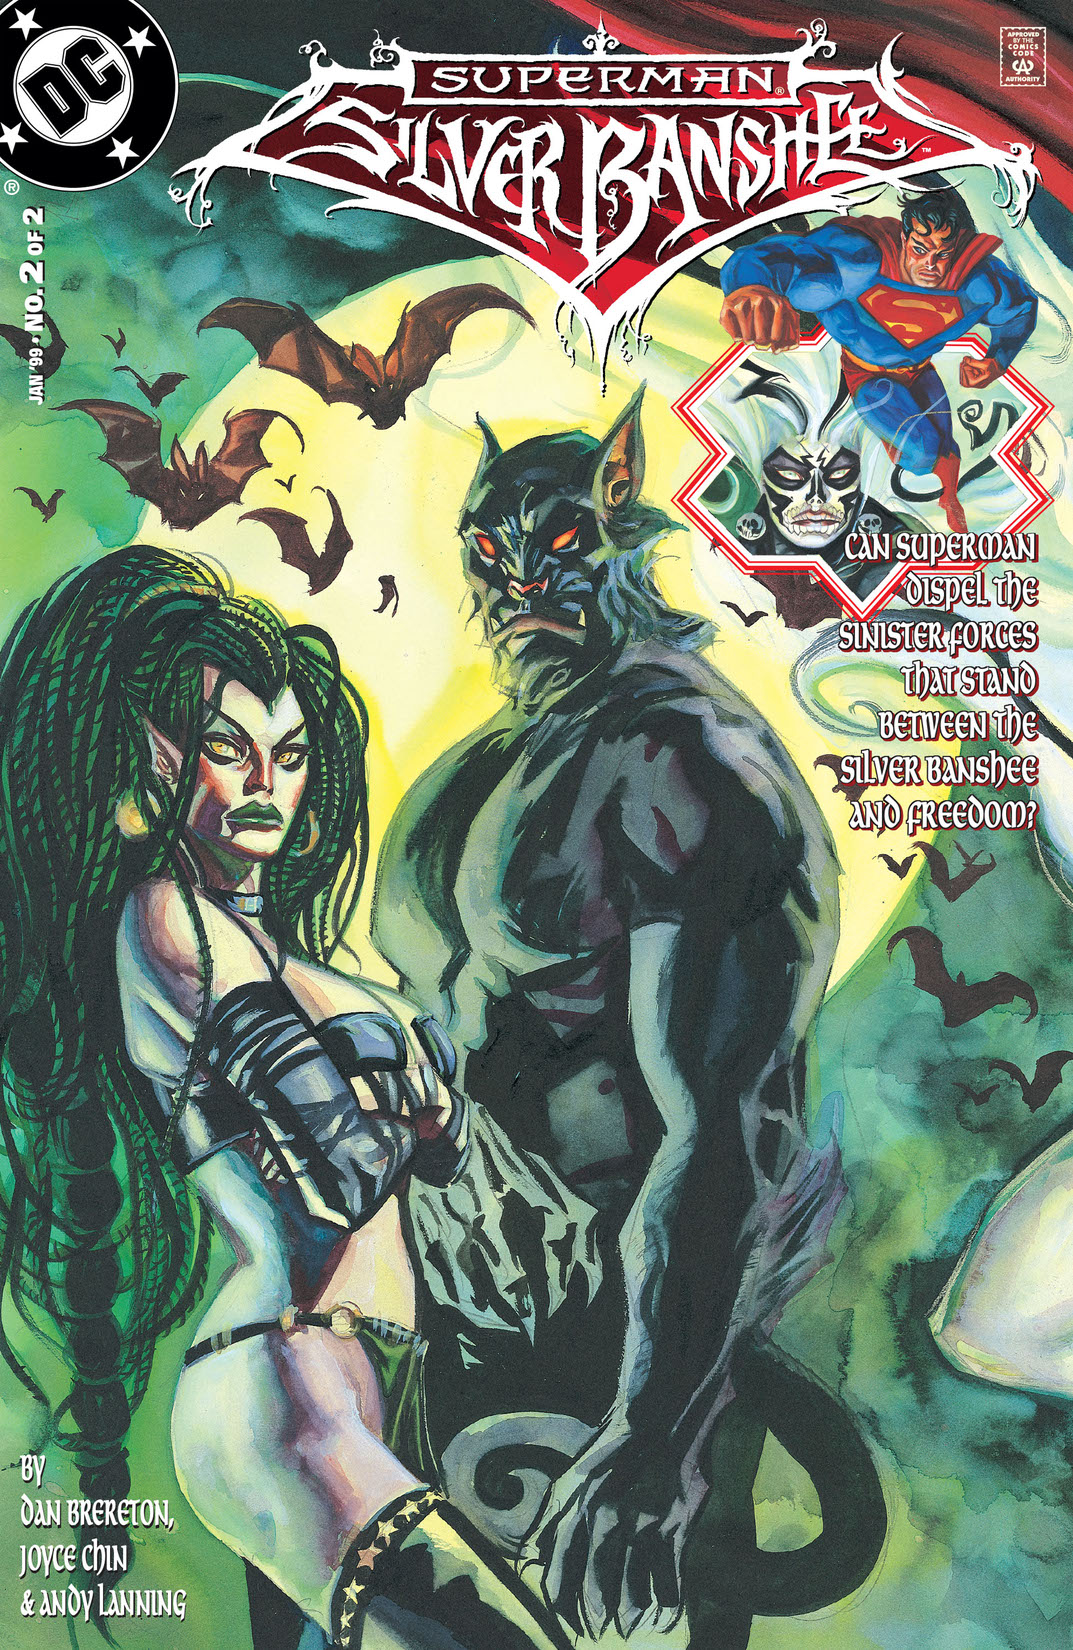 Superman: Silver Banshee (1998-) #2 preview images